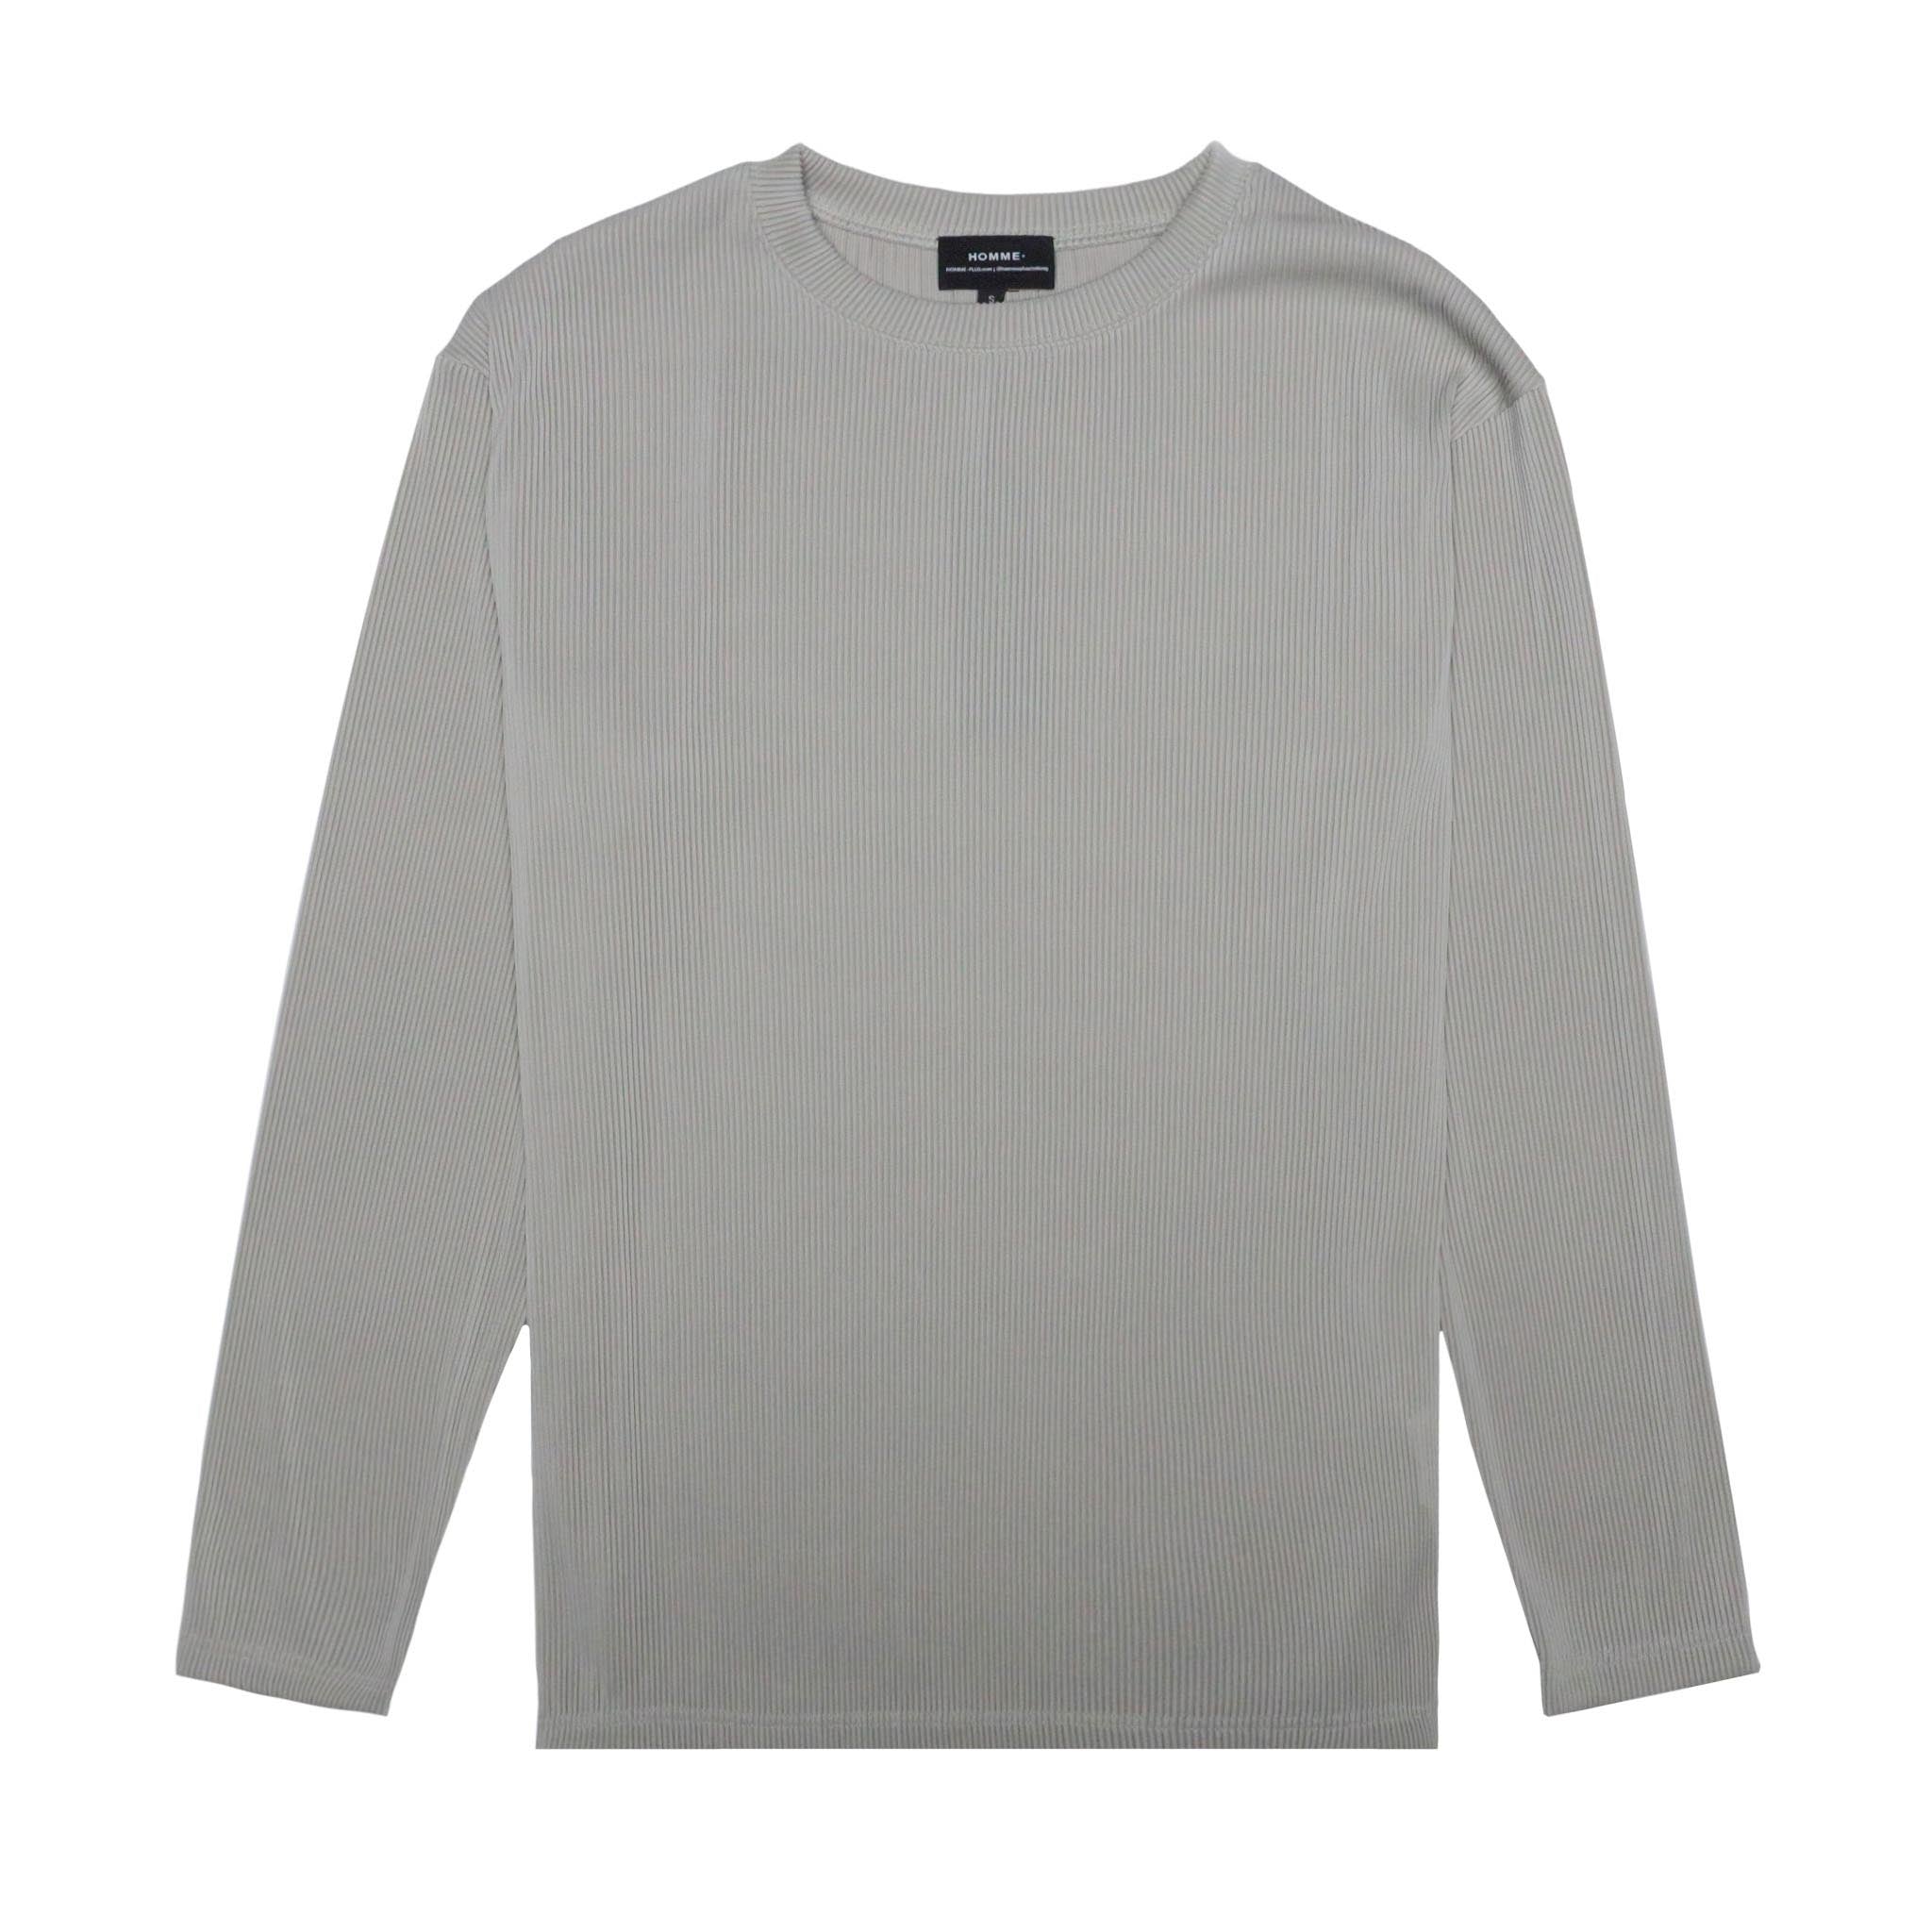 HOMME+ Pleating L/S Tee Light Taupe